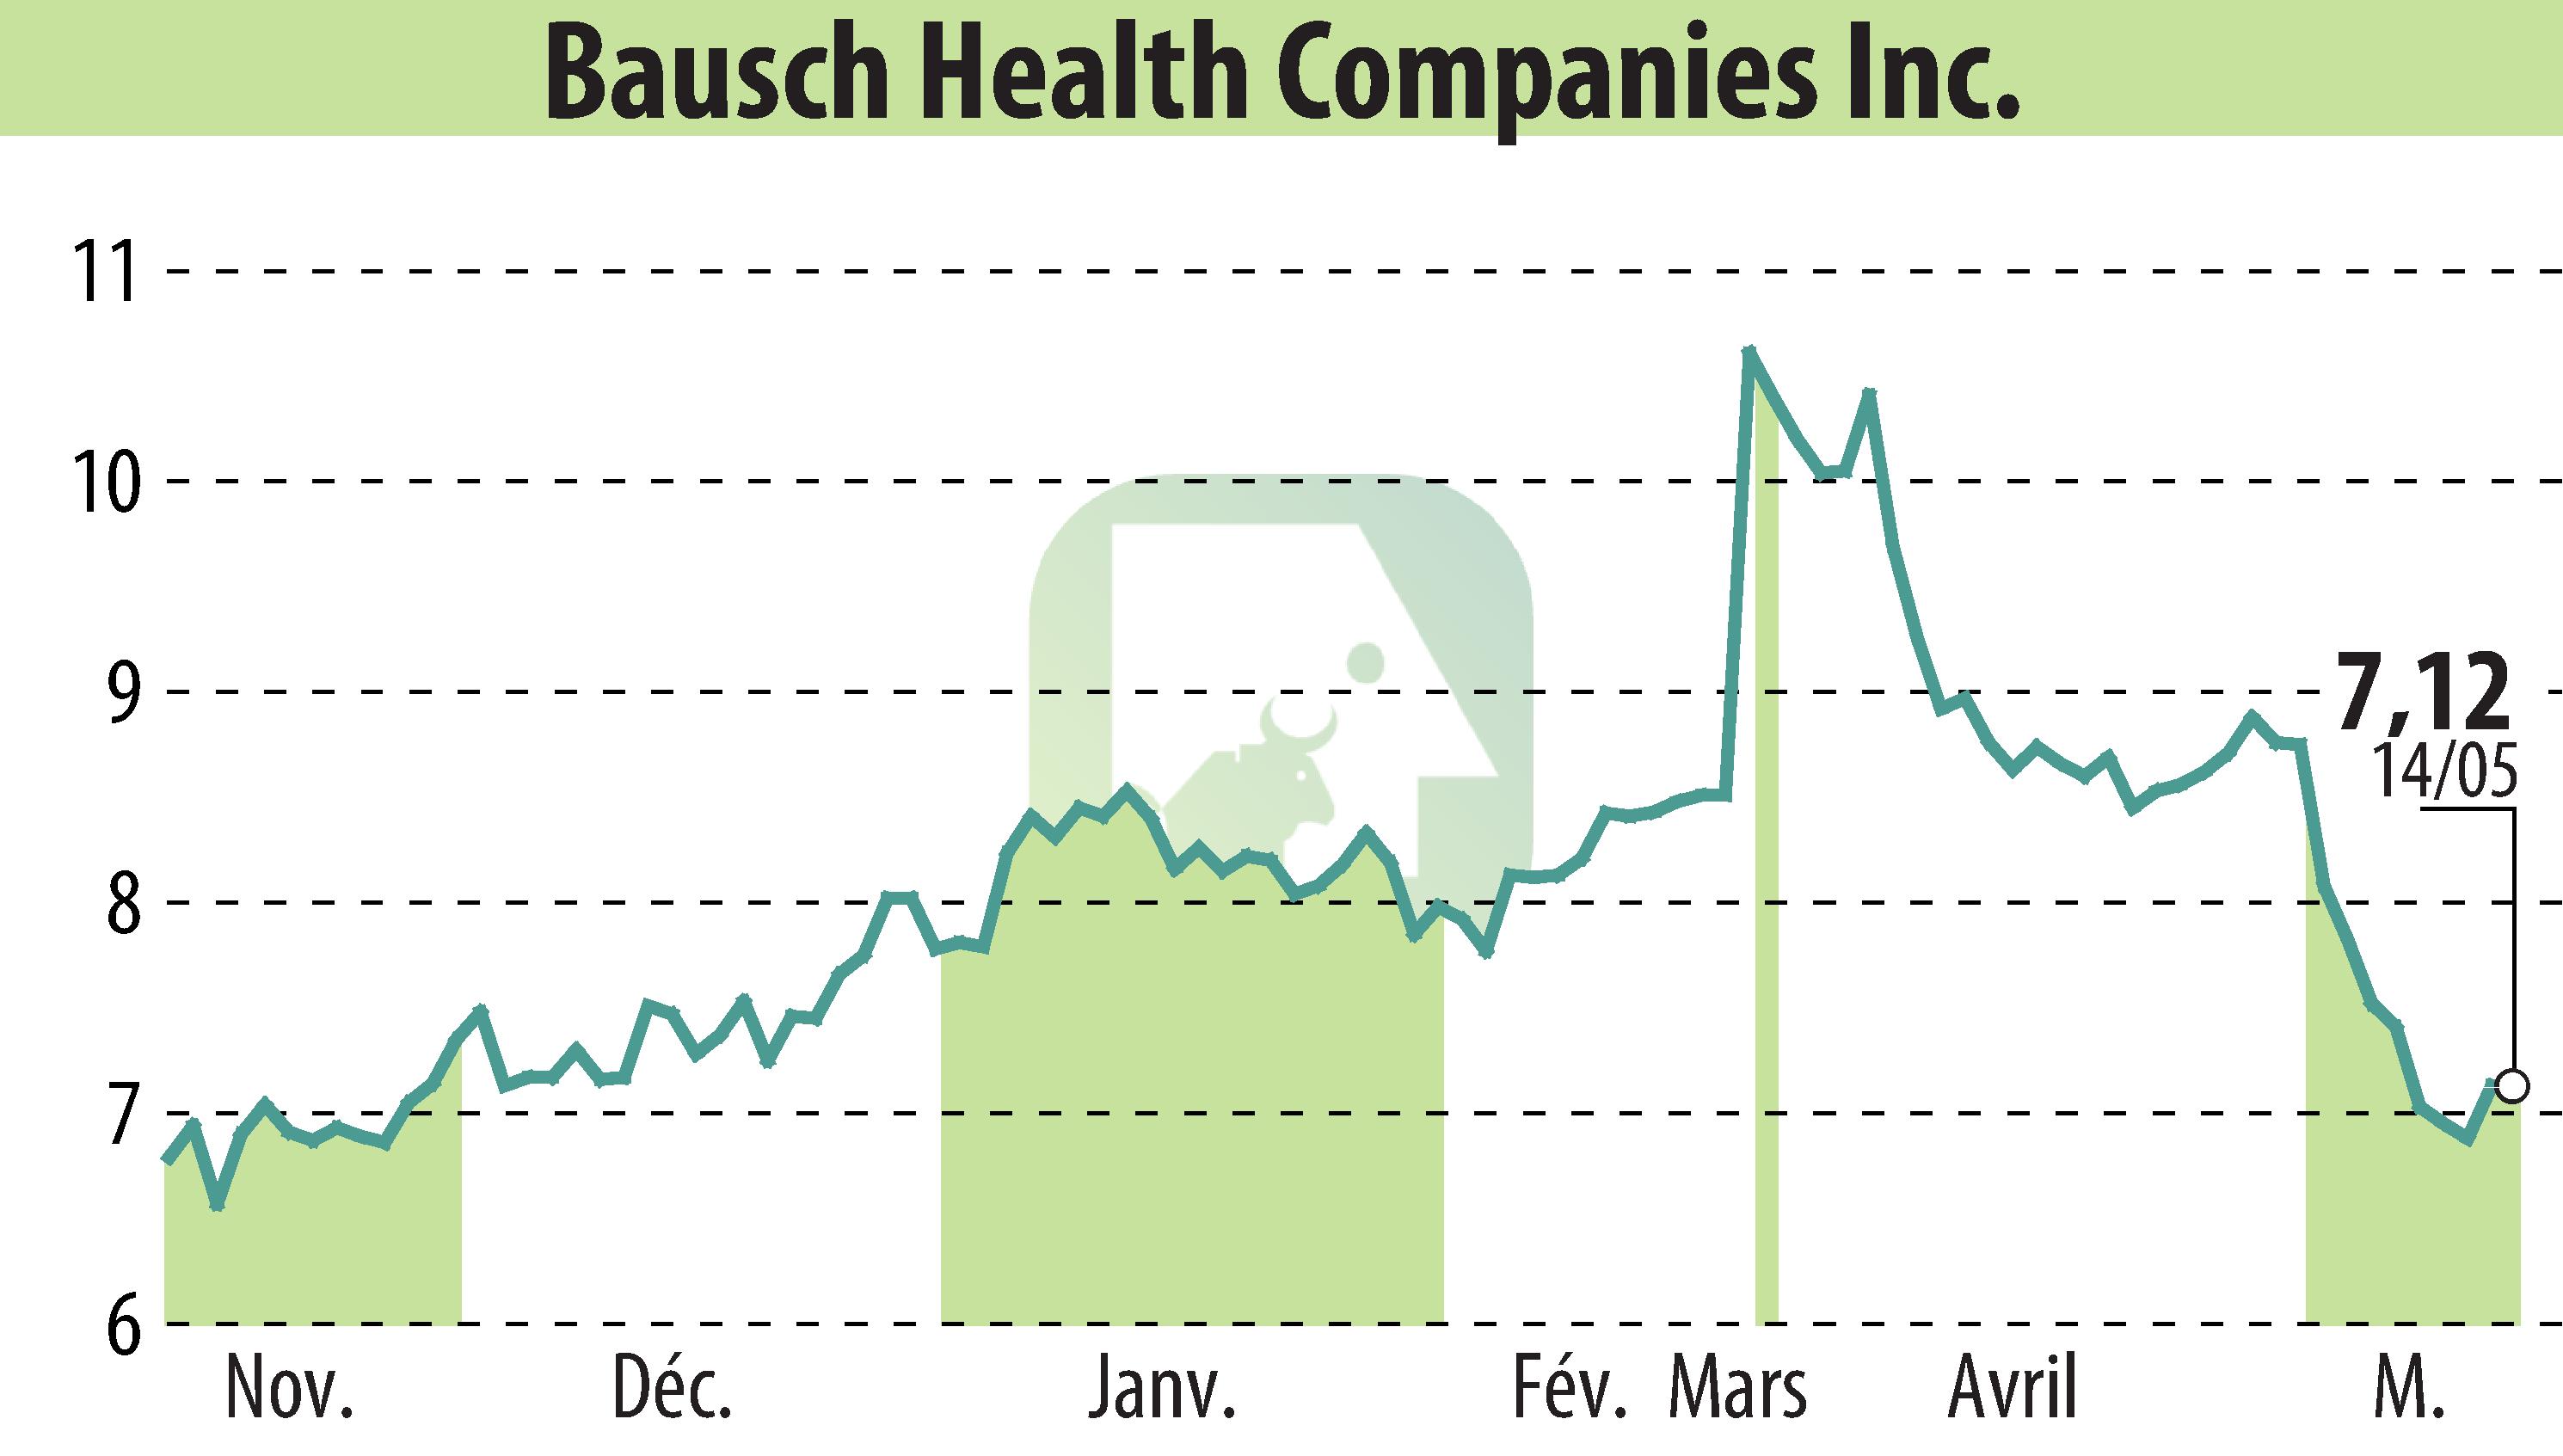 Stock price chart of Bausch Health Companies Inc. (EBR:BHC) showing fluctuations.